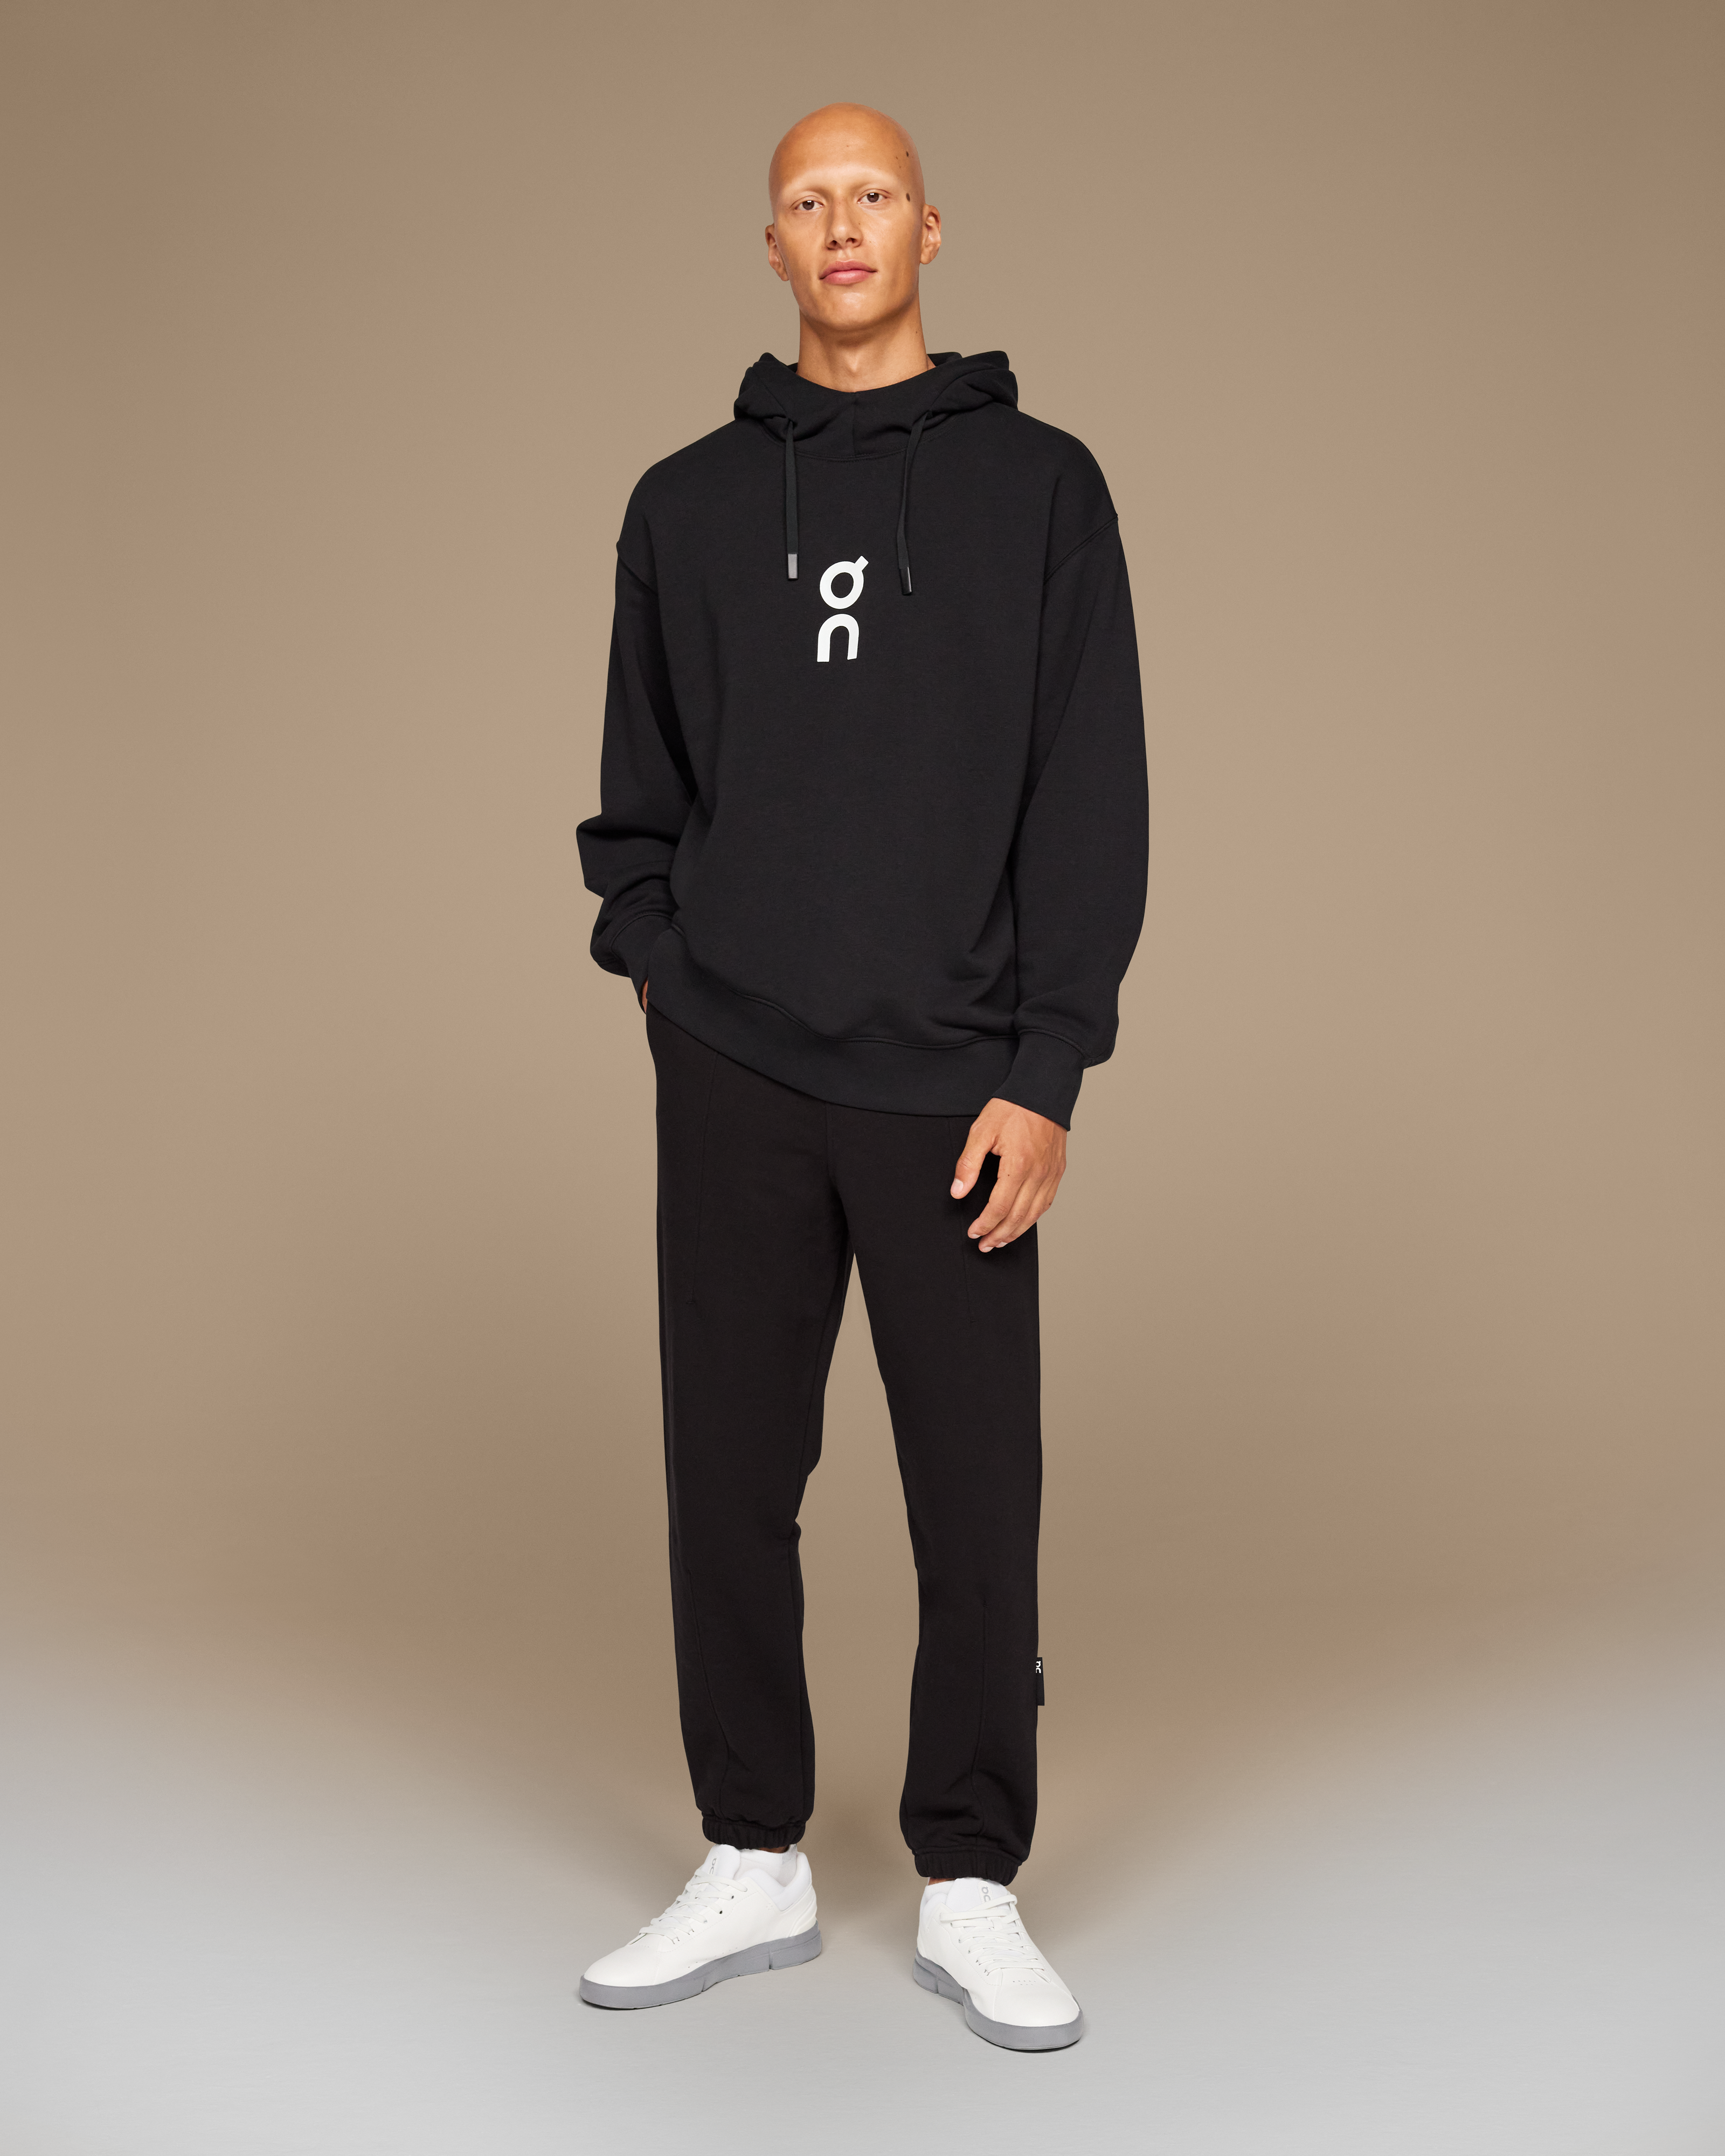 WHAT SIZE SHOULD YOU GET IN FEAR OF GOD ESSENTIALS HOODIES? Short ans, Essentials Hoodie Size Fitting